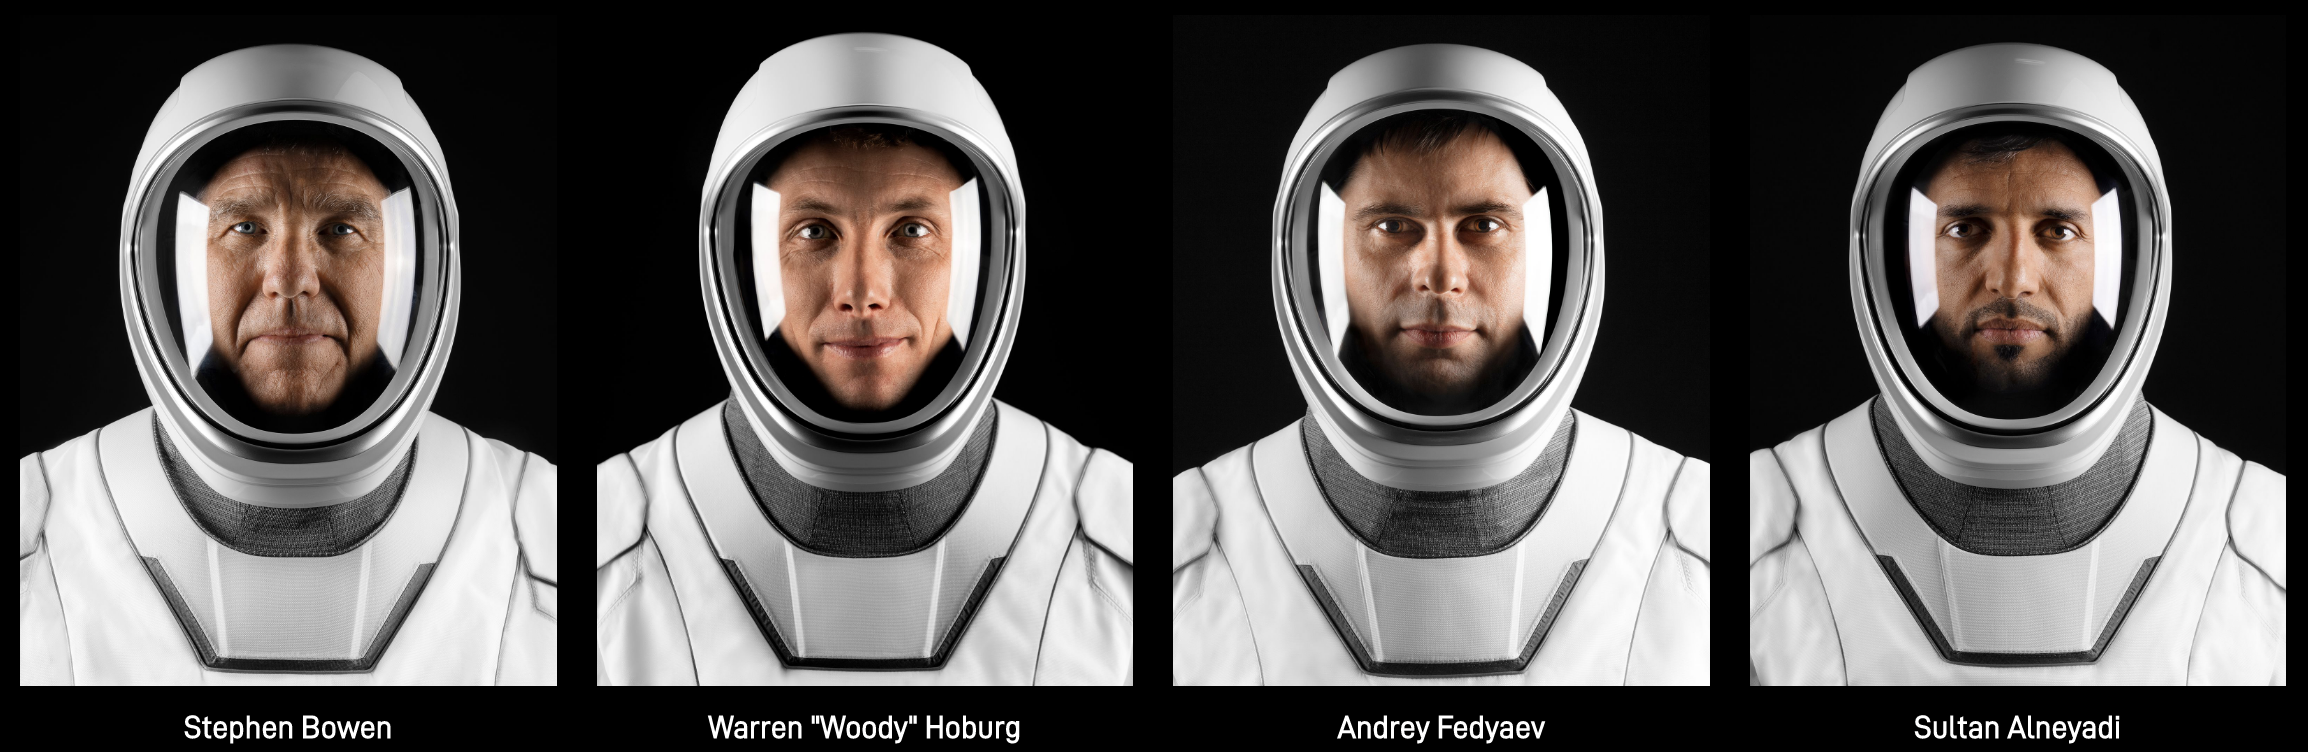 The Crew-6 astronauts.  (Image: SpaceX)